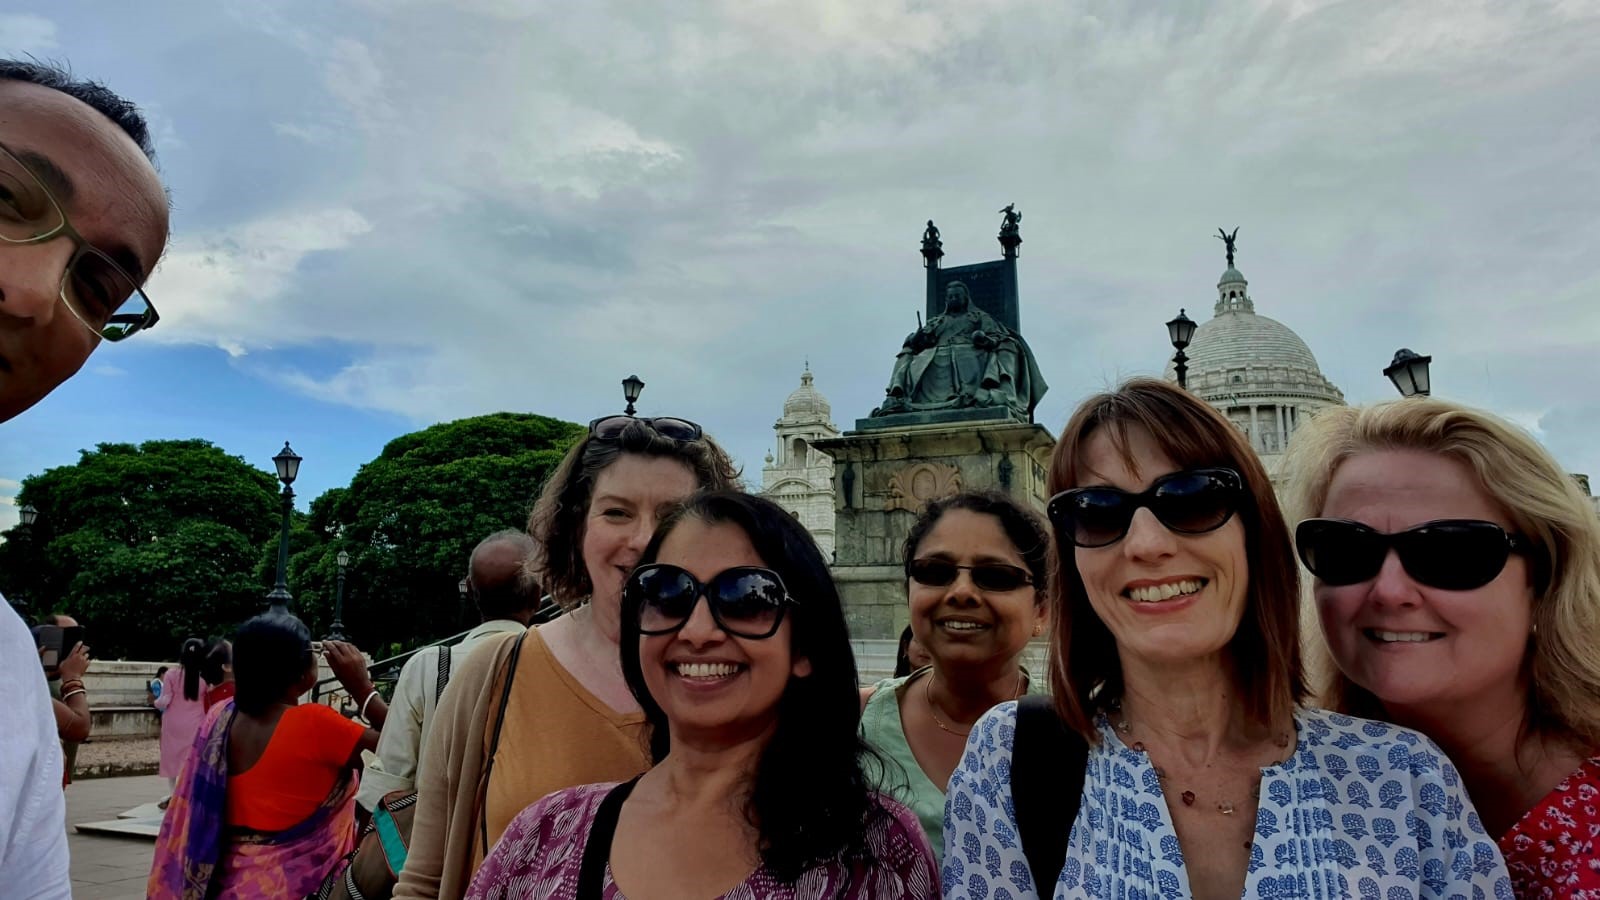 The Cambridge team found some time for sightseeing!